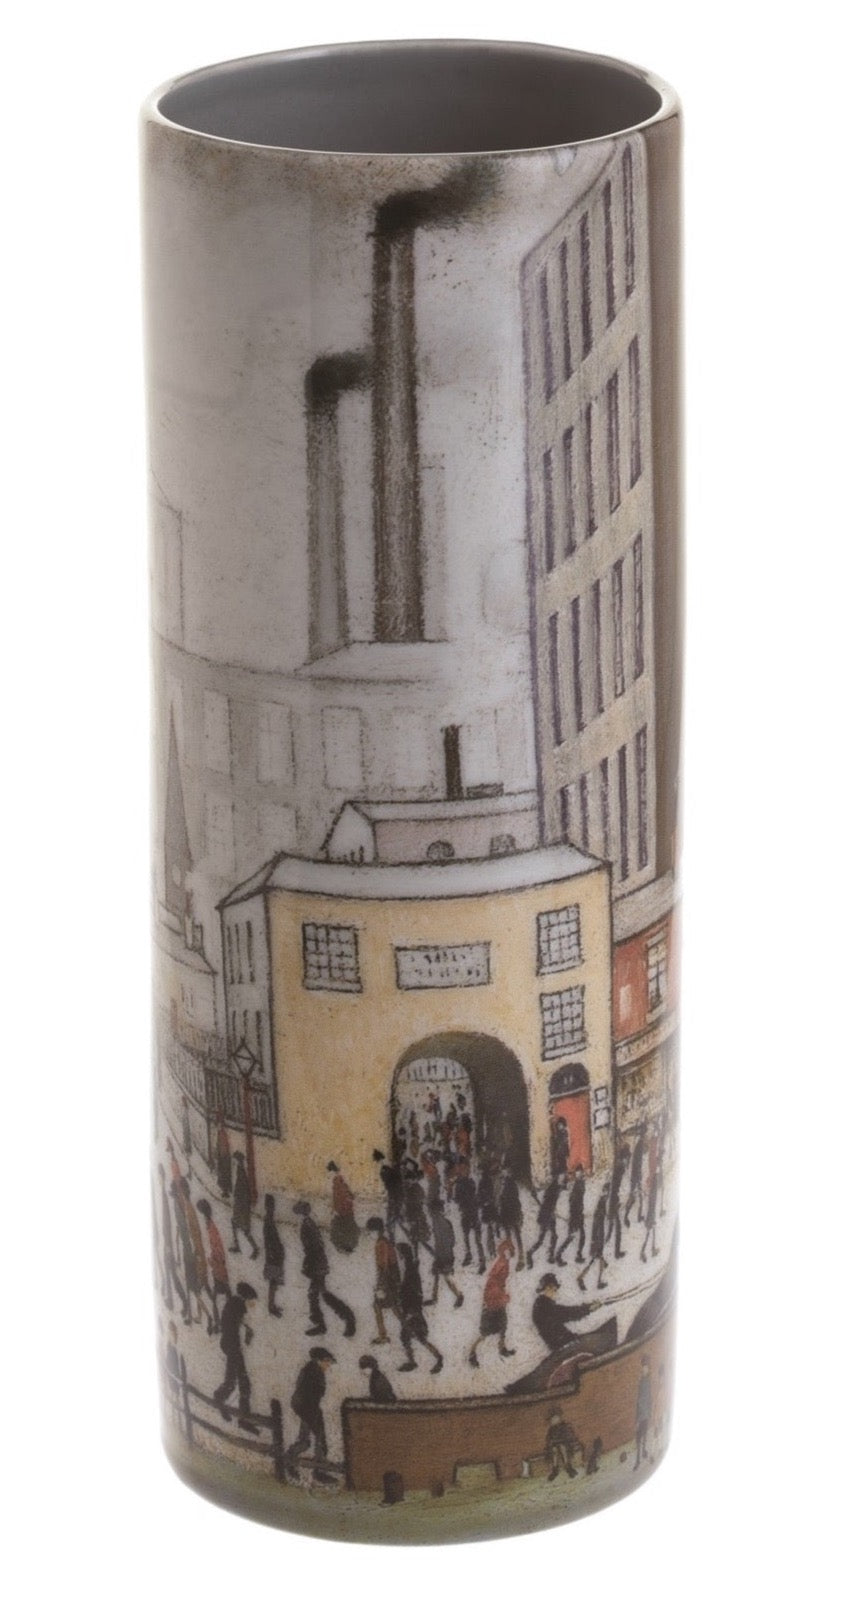 Medium Vase by John Beswick - Lowry - Coming from the Mill JBLOW11